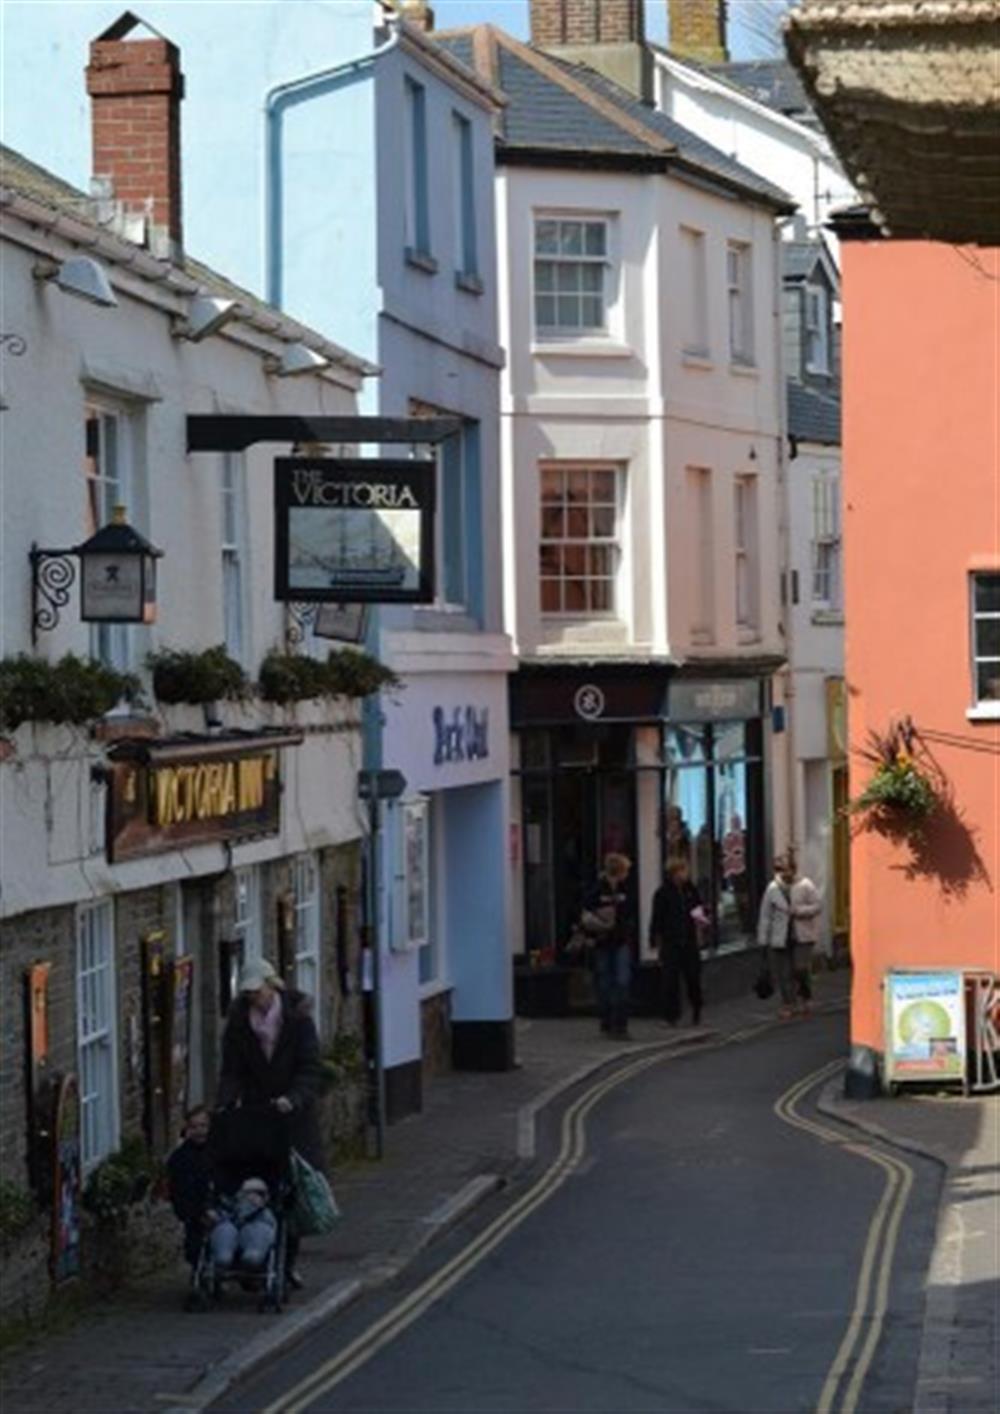 Award winning pubs, restaurants and shops all on Fore Street